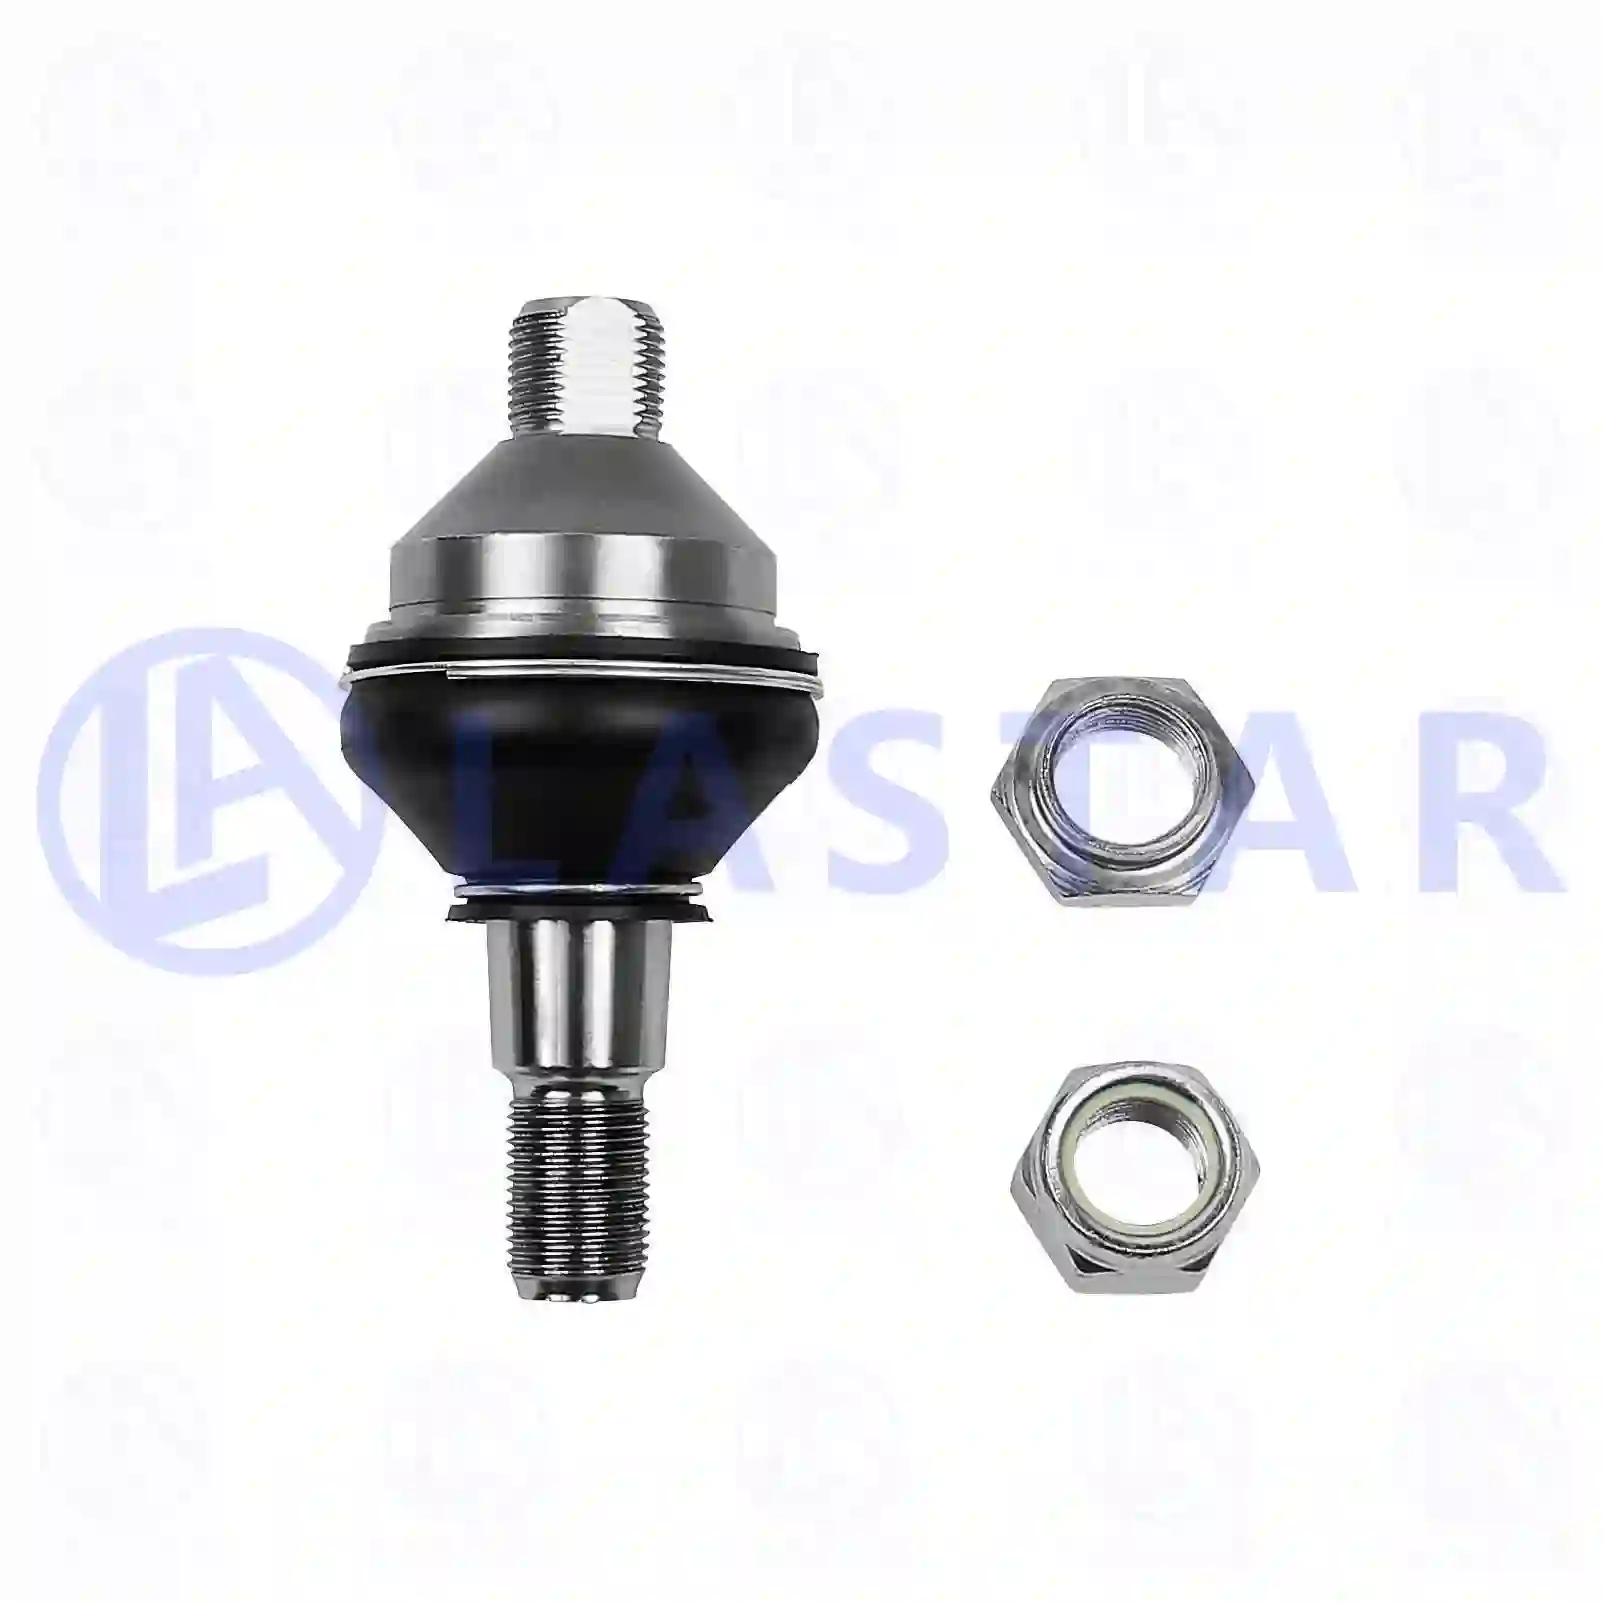 Control Arm Ball joint, right hand thread, la no: 77731268 ,  oem no:360828, 93802242, 93804061, 93807320, 93807542, 93807545, 03302242, 93802242, 93807320, 93807545, 360828, ZG40410-0008 Lastar Spare Part | Truck Spare Parts, Auotomotive Spare Parts